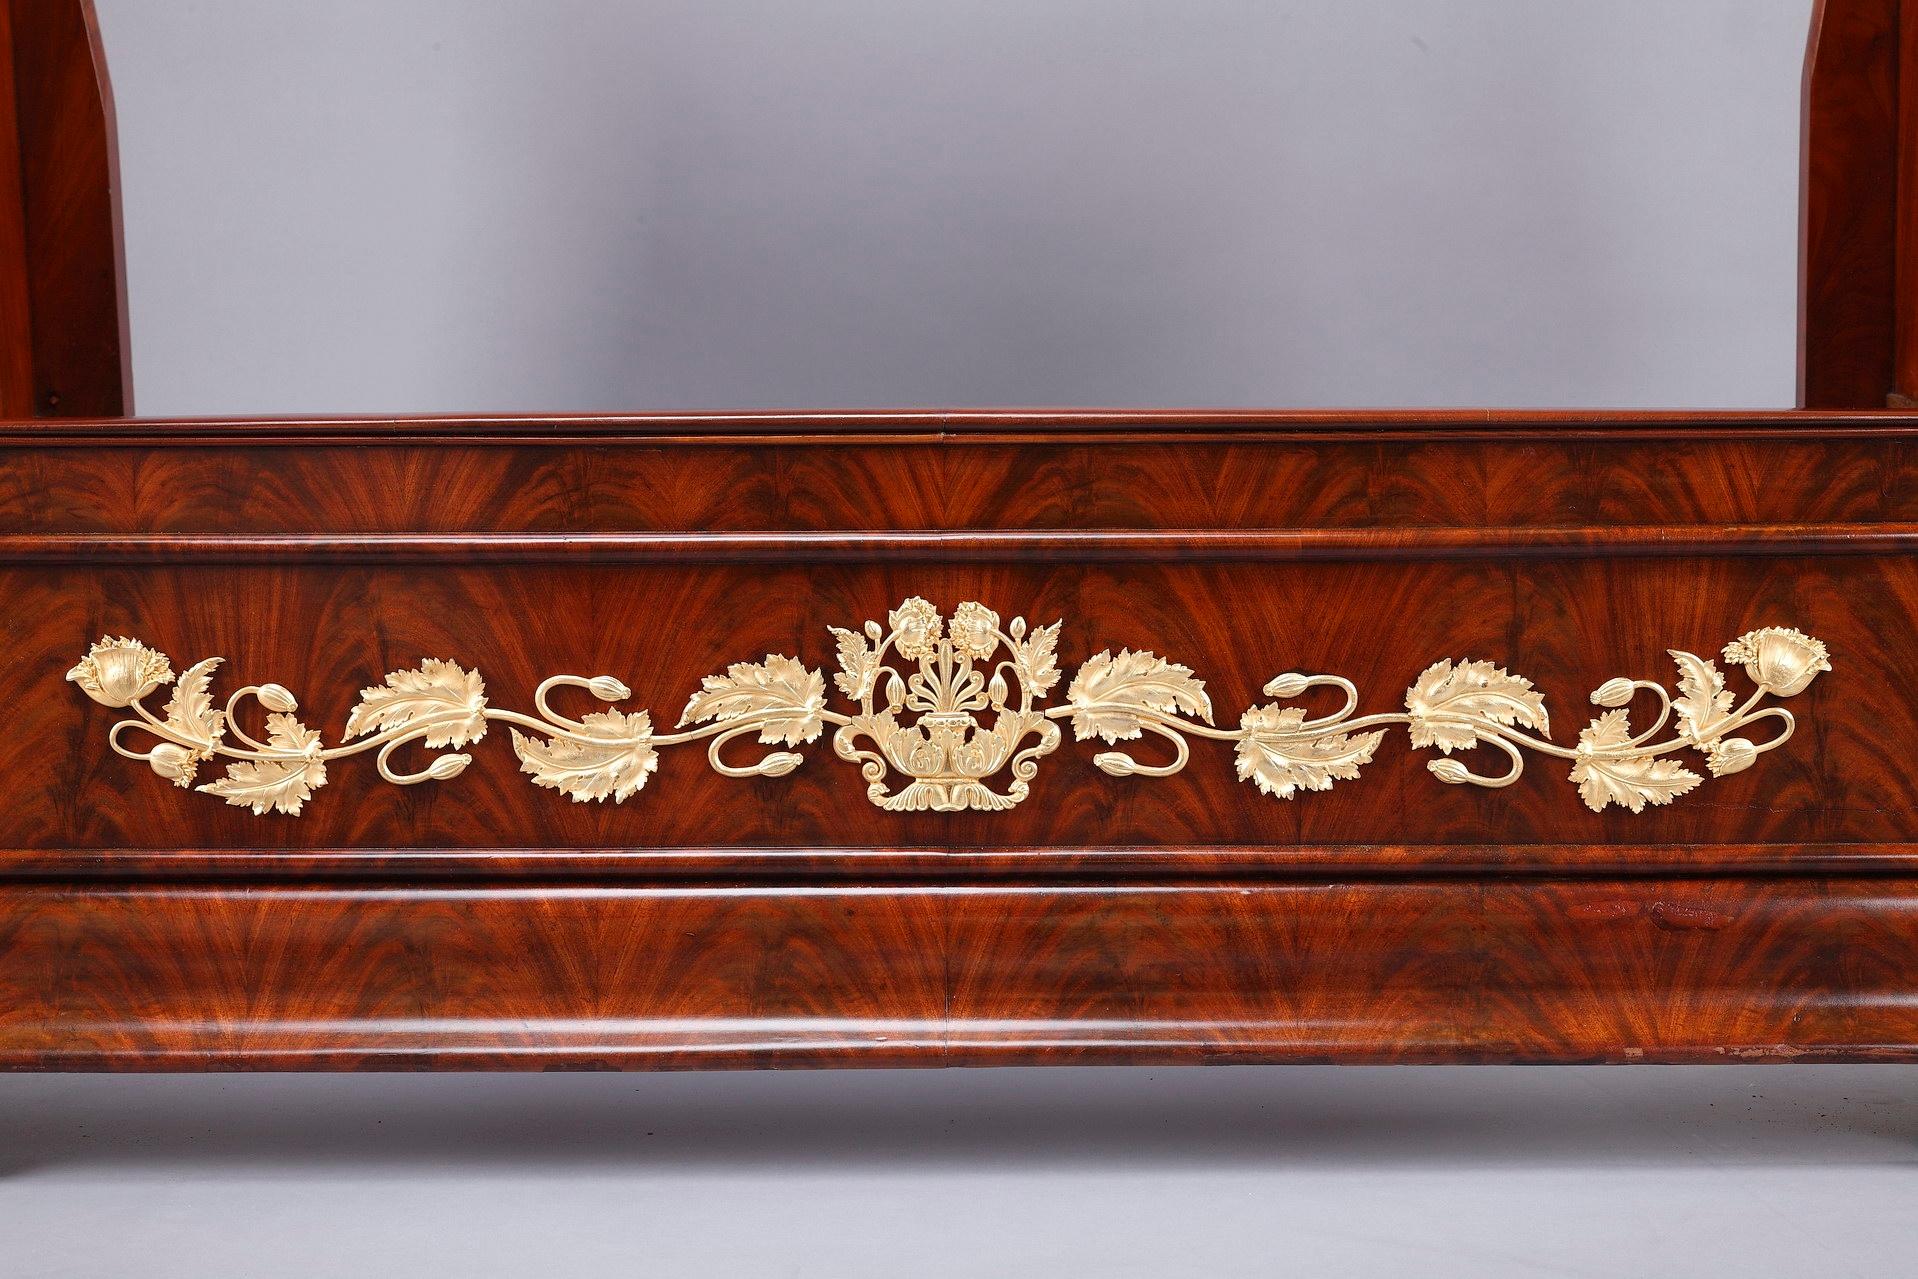 Gilt Empire Sleight Bed Attributed to Jacob Frères and Thomire